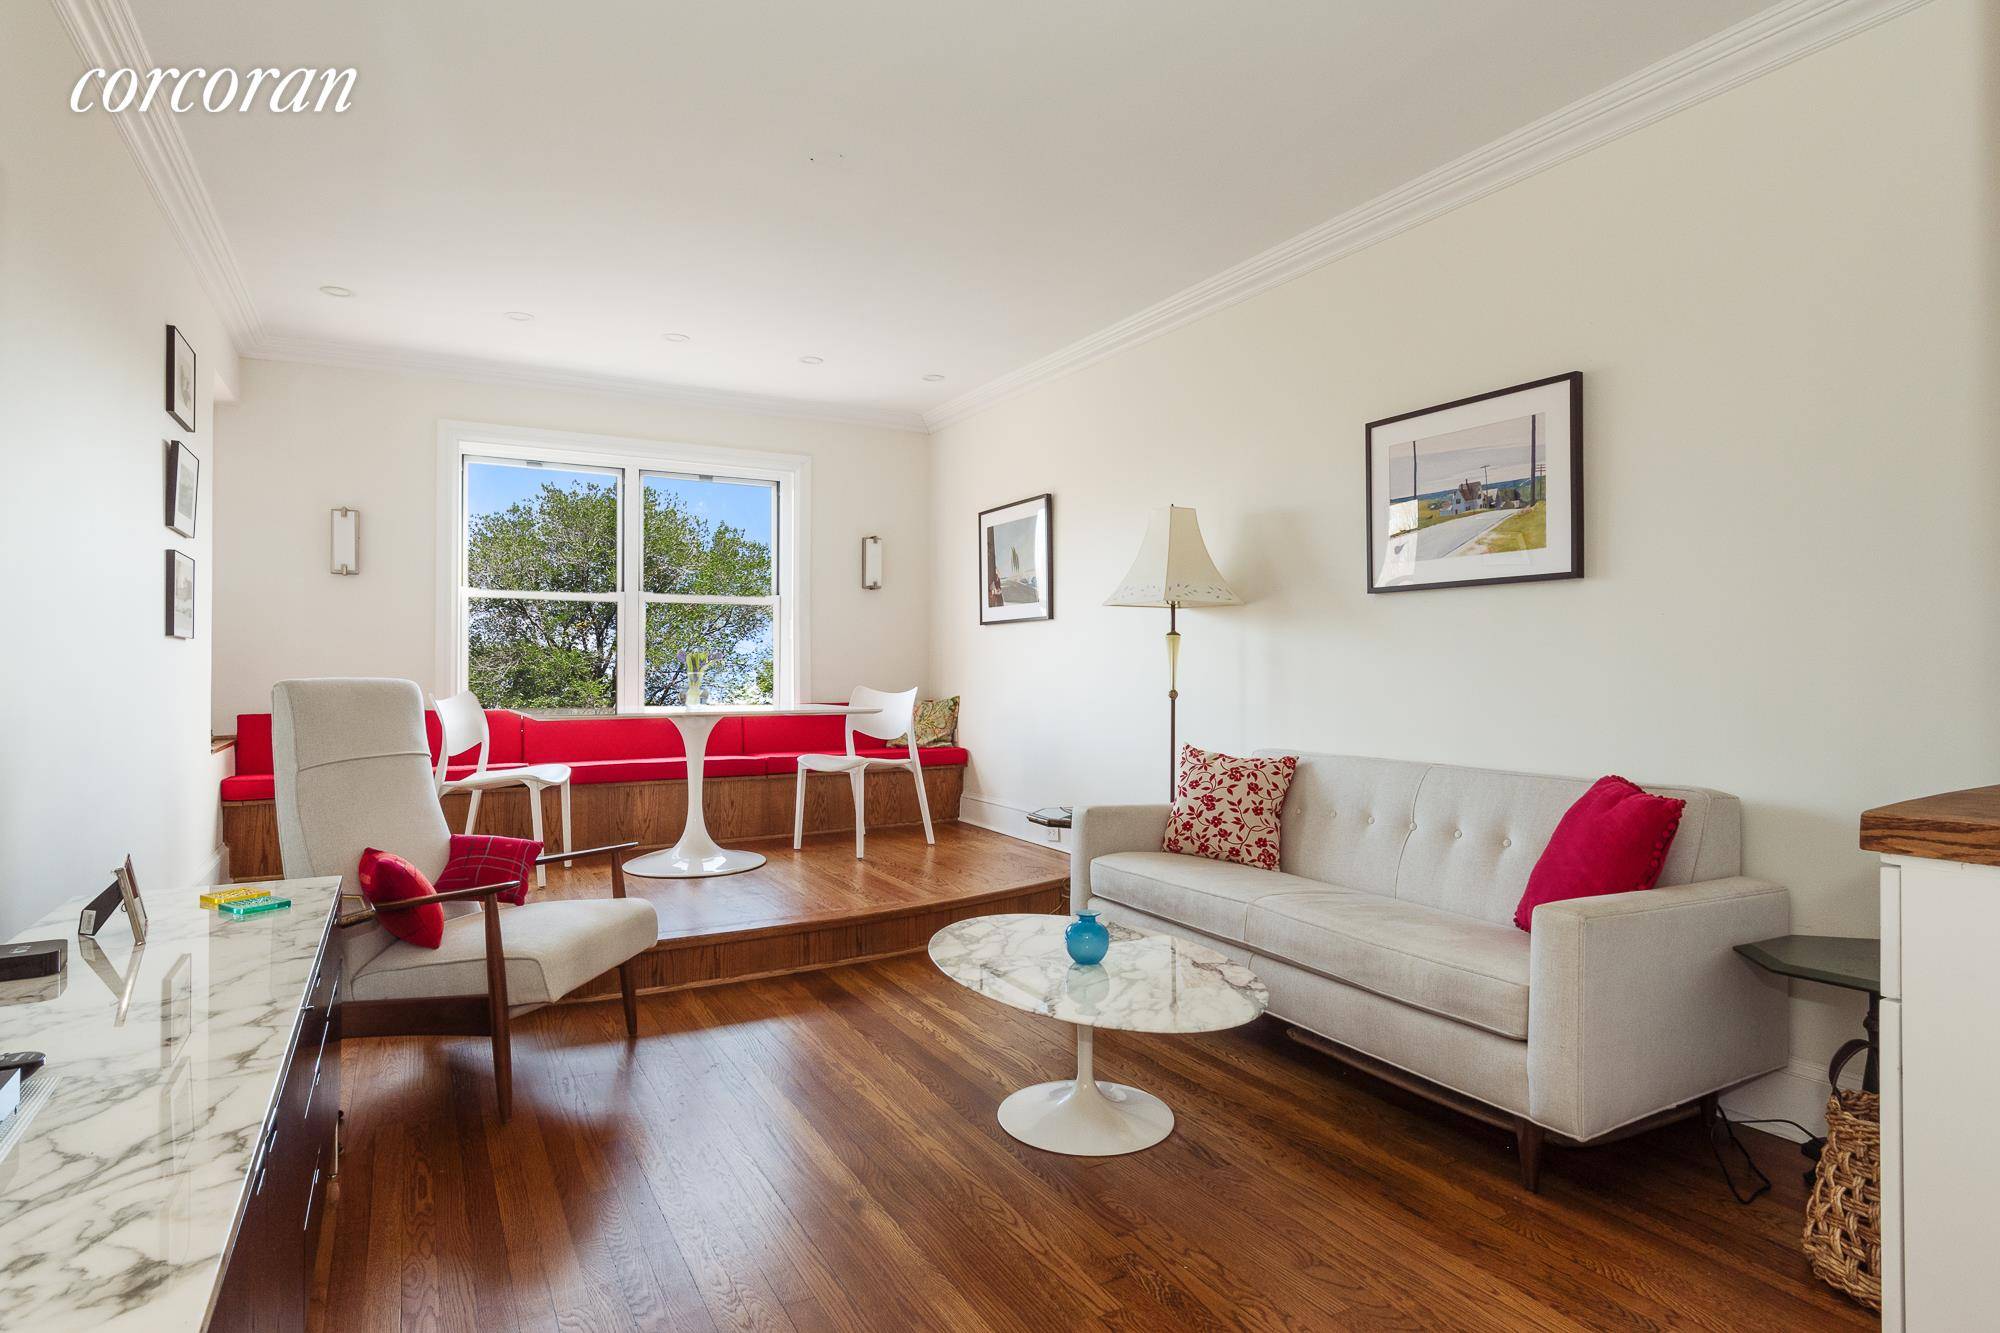 Breathtaking direct Central Park views await from this renovated pre war 2 bed, 2 bath condo at 425 Central Park West.